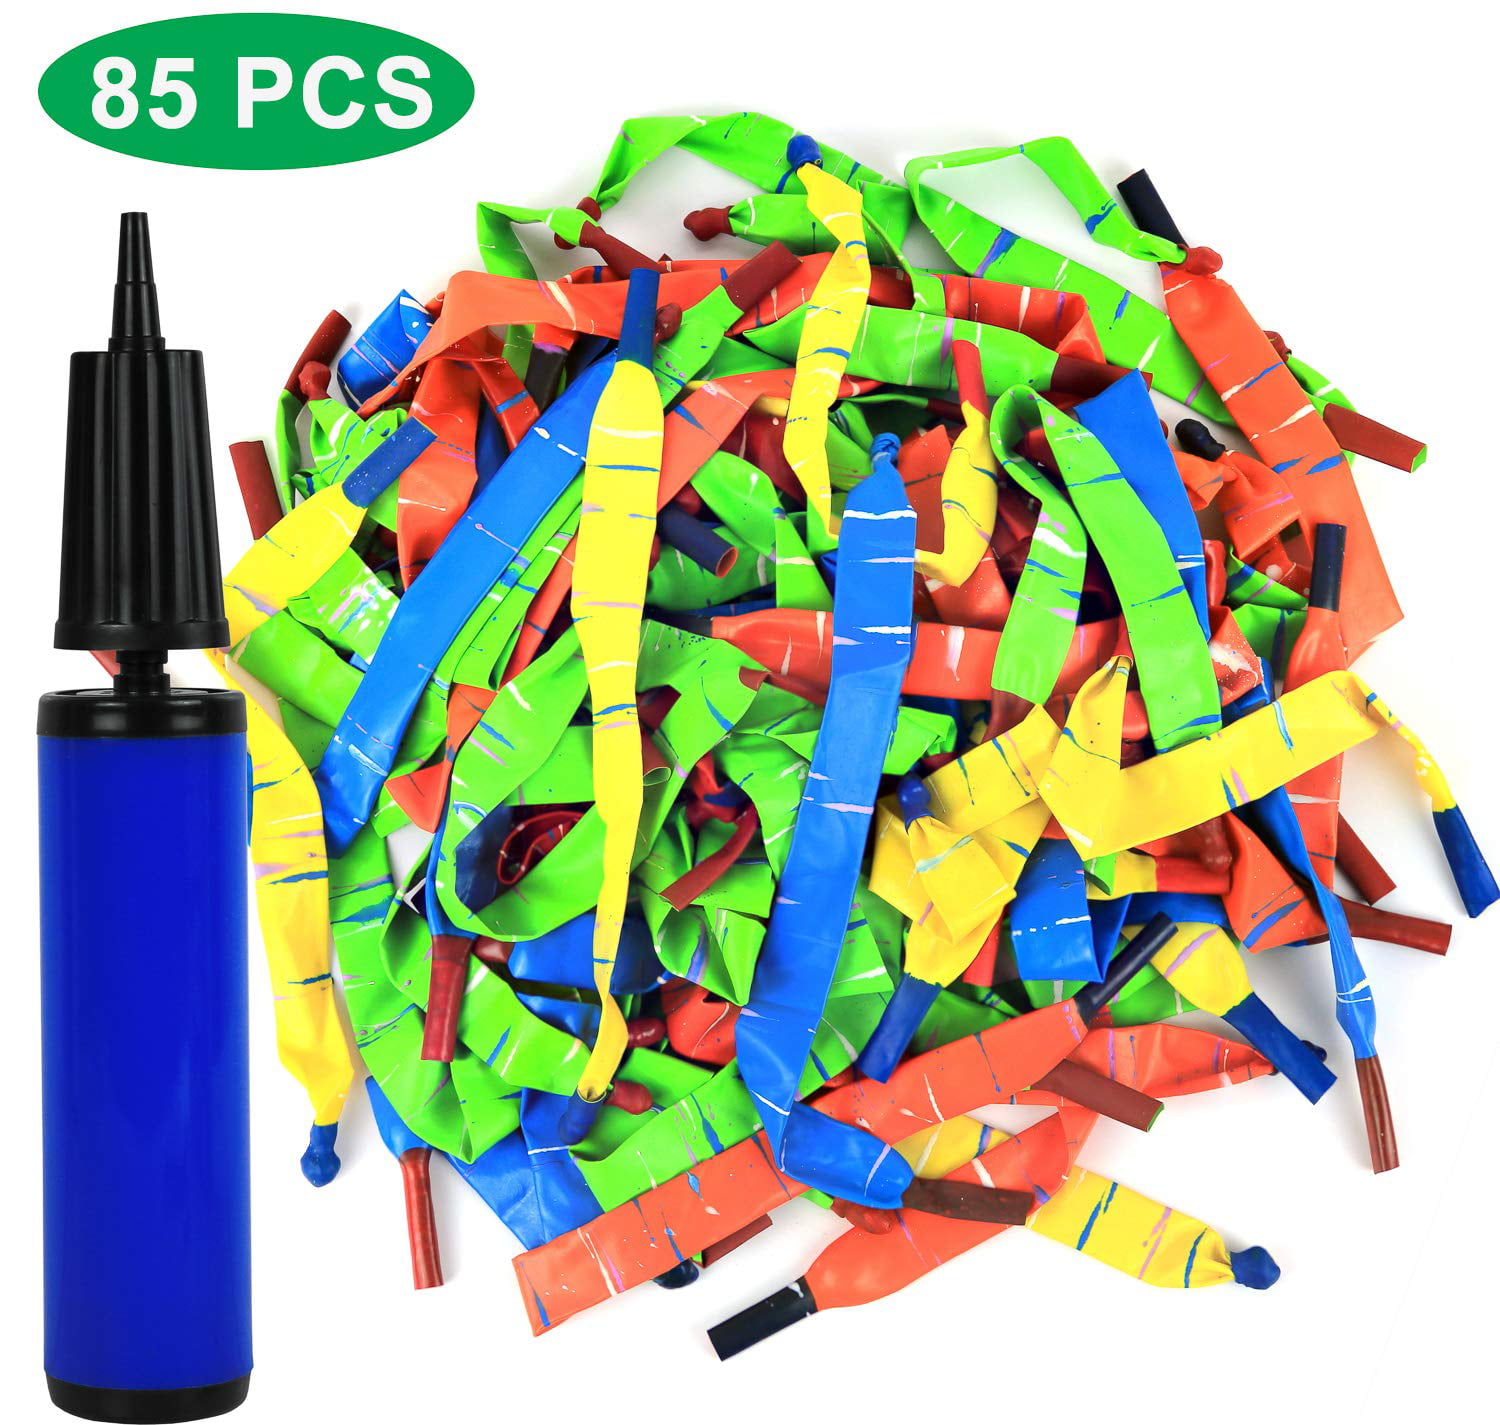 20x Rocket Balloon Carded Party supplies blow fun children's toys w/fill tube 